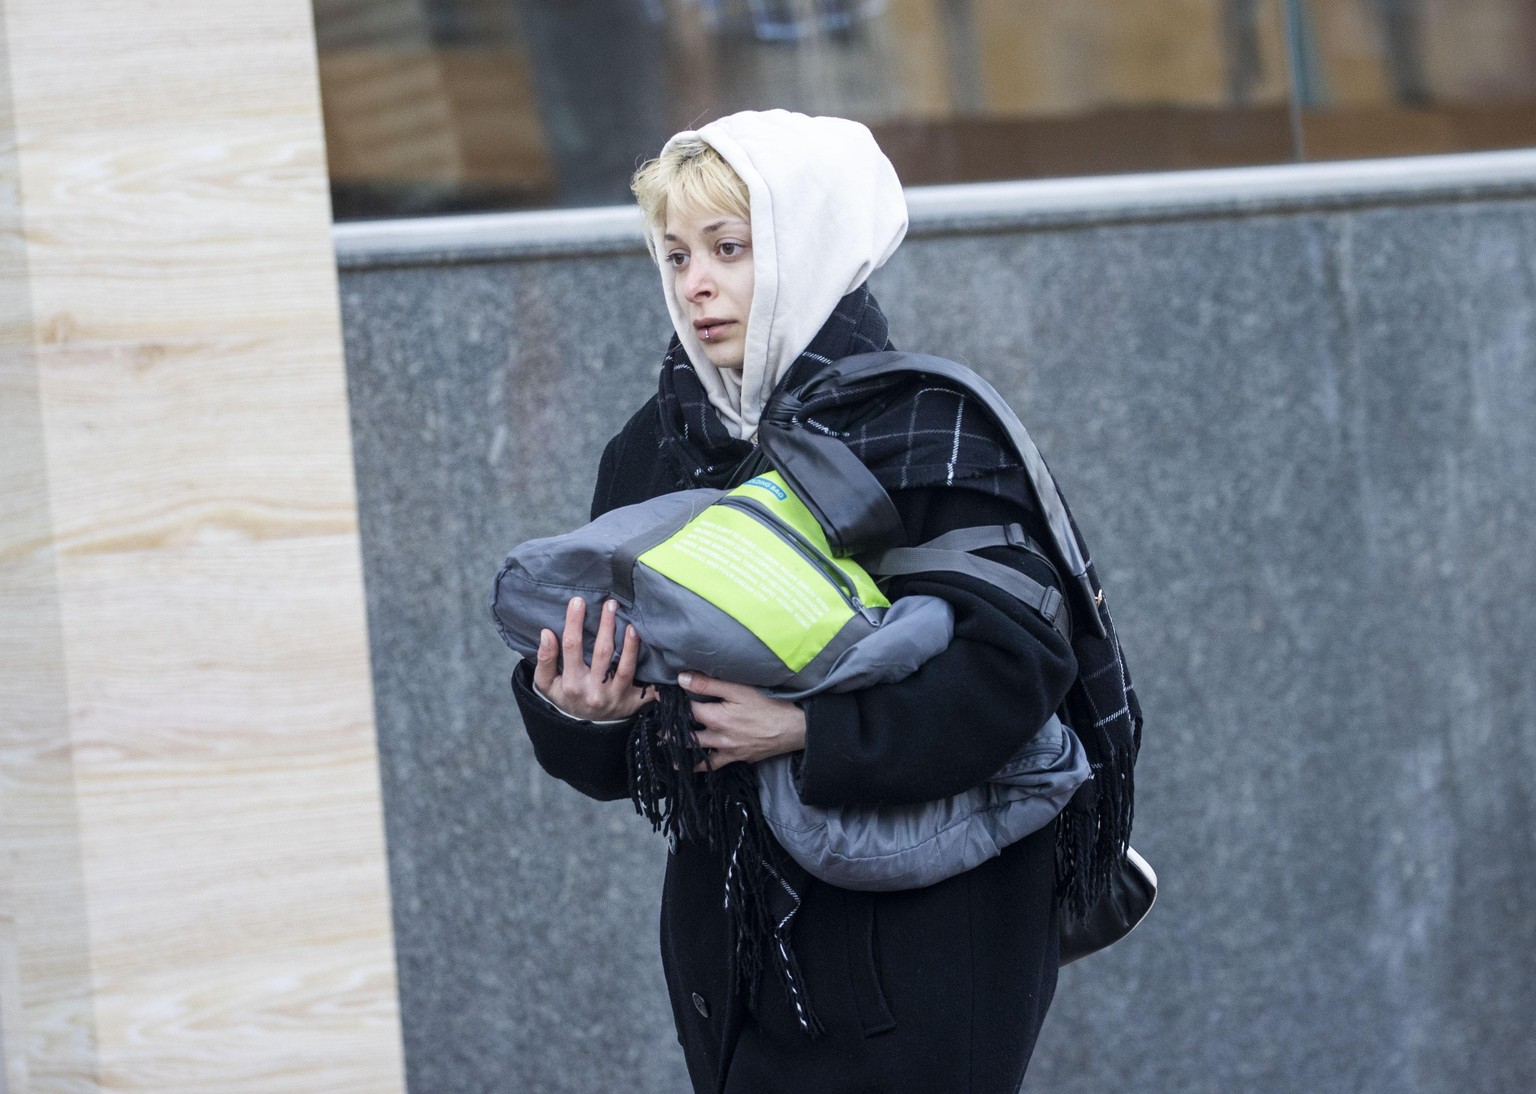 KRAMATORSK, UKRAINE - FEBRUARY 24: Citizens of Ukraine appear with their suitcases on the streets of Kramatorsk city in eastern Ukraine's Donbas region on February 24, 2022. Aytac Unal / Anadolu Agenc ...